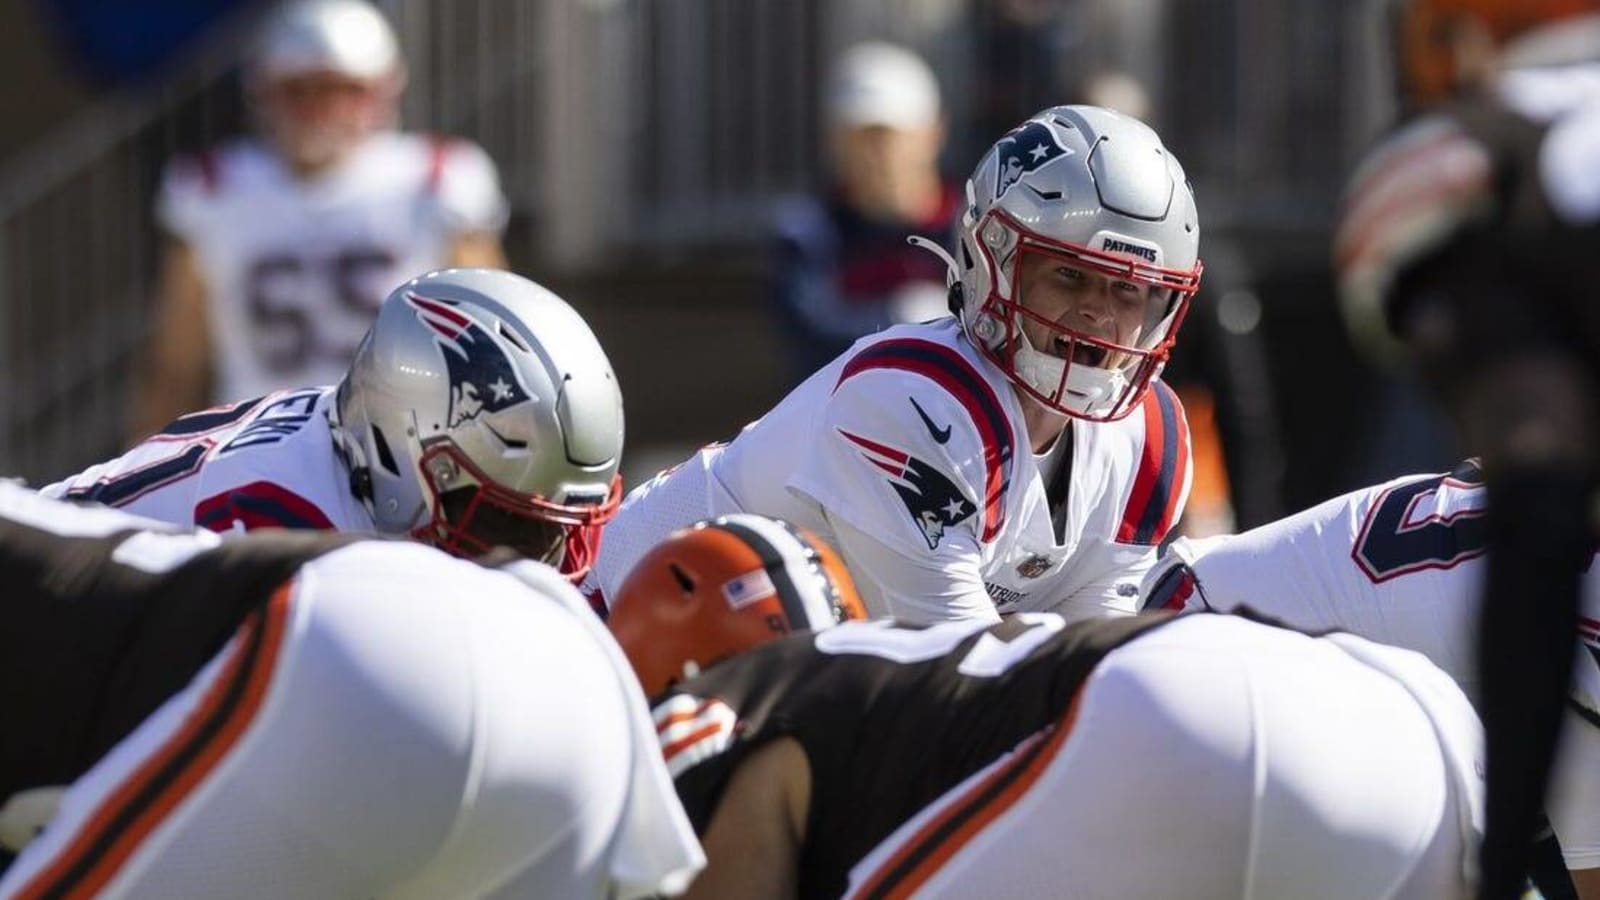 Bailey Zappe guides Patriots past Browns 38-15